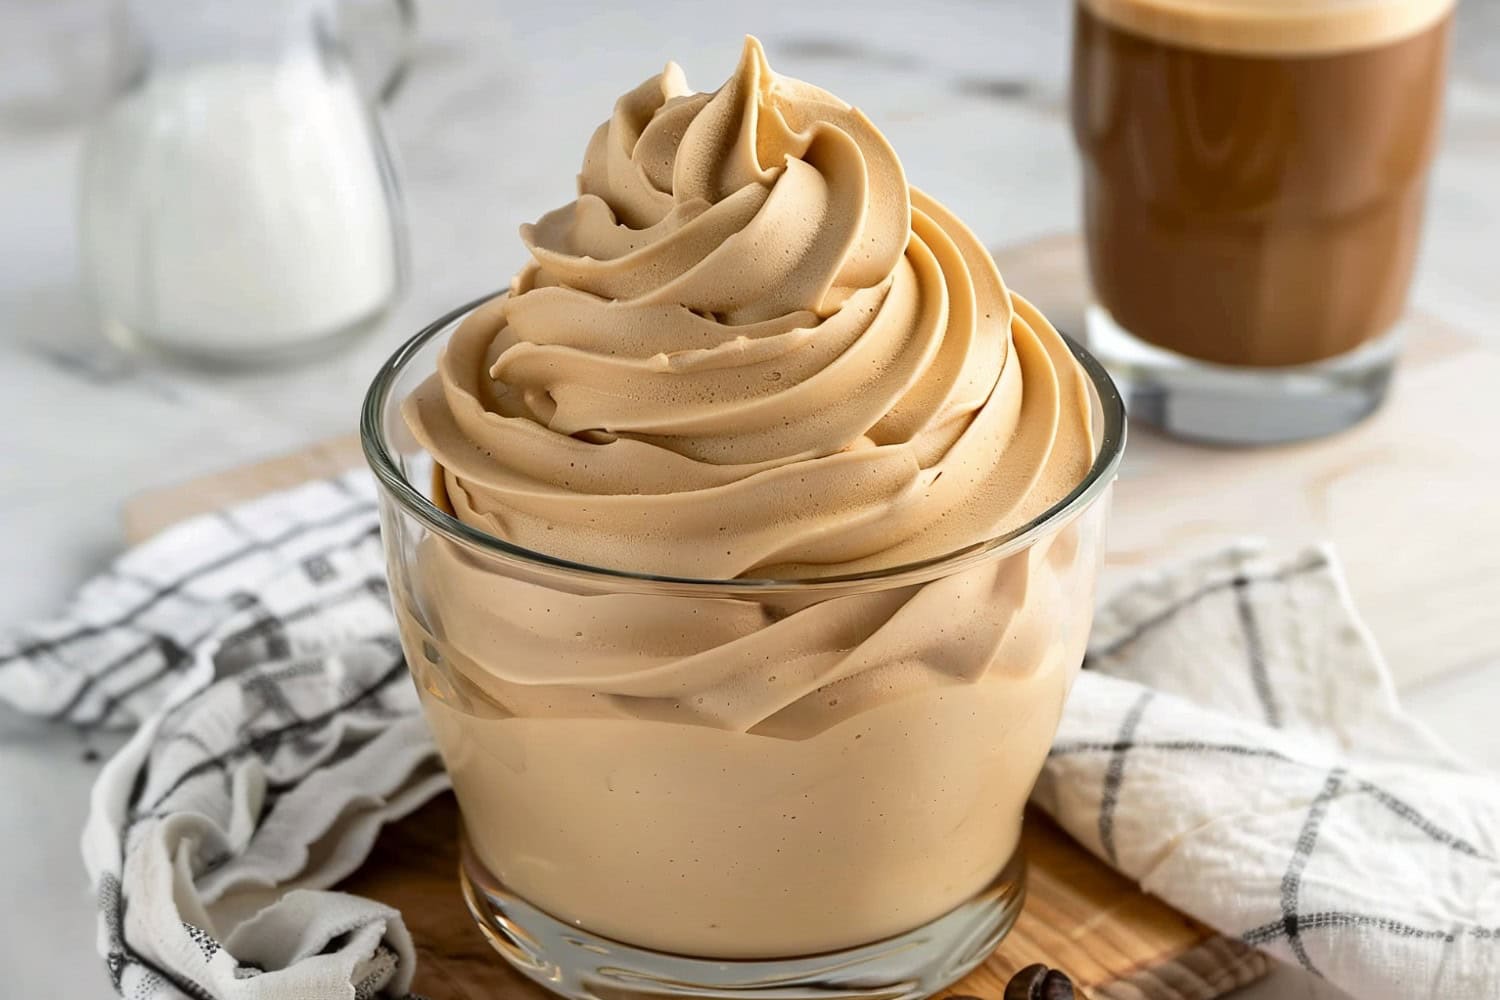 Irresistible coffee-flavored whipped cream, perfect for garnishing your favorite desserts or morning coffee